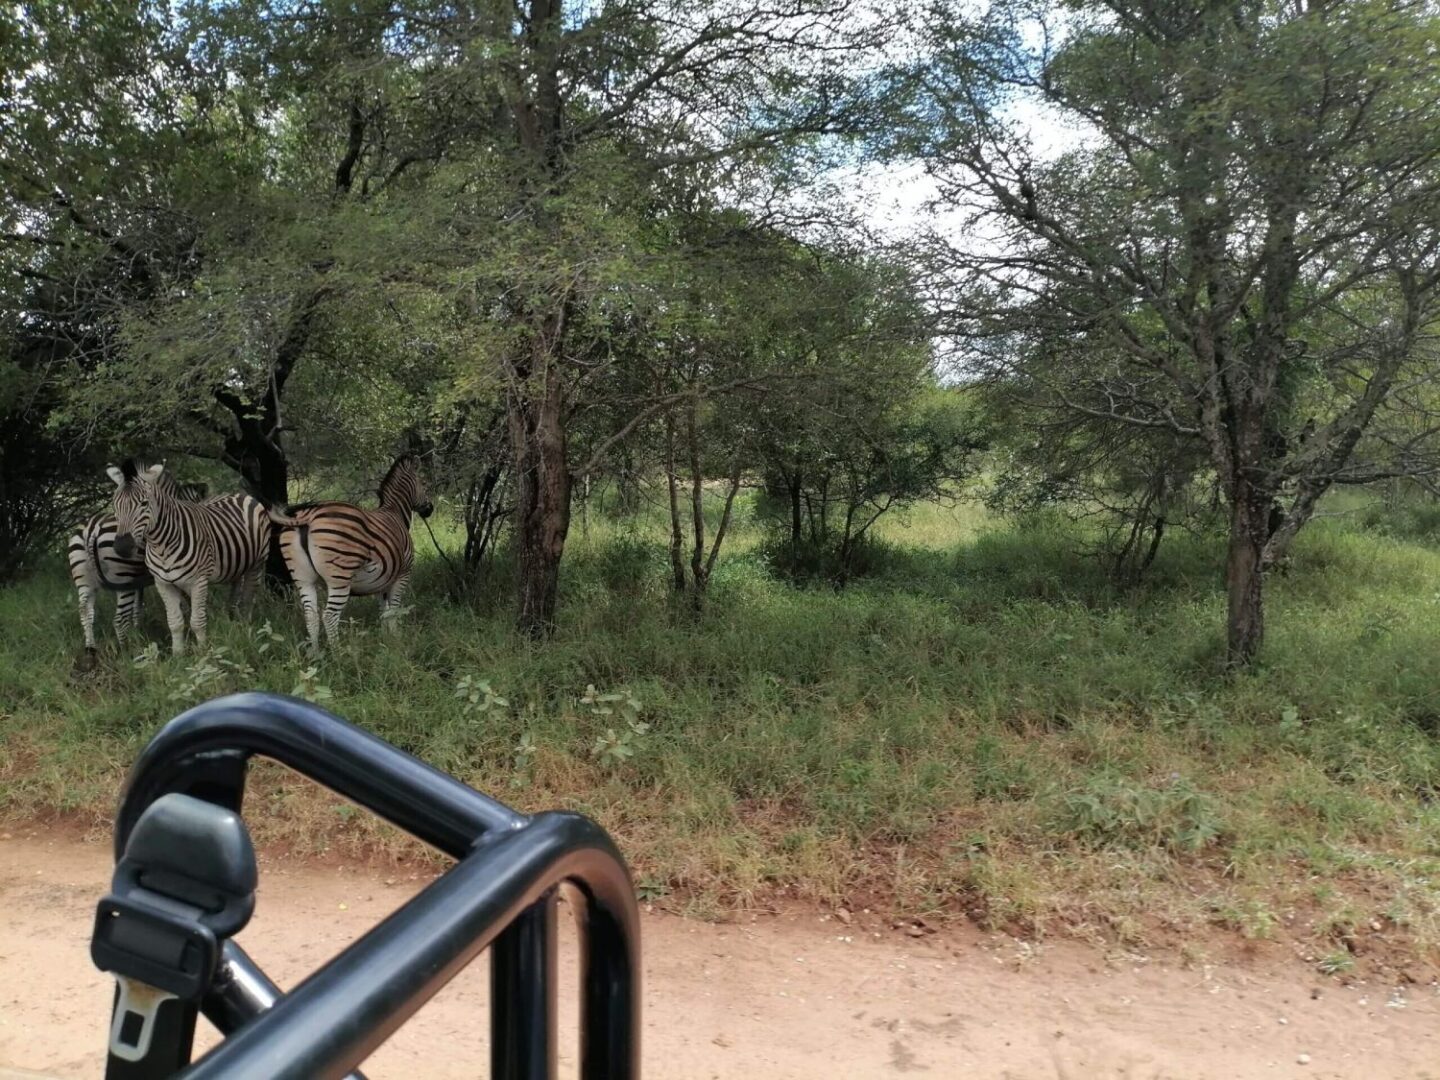 A zebra is standing in the distance behind another zebra.